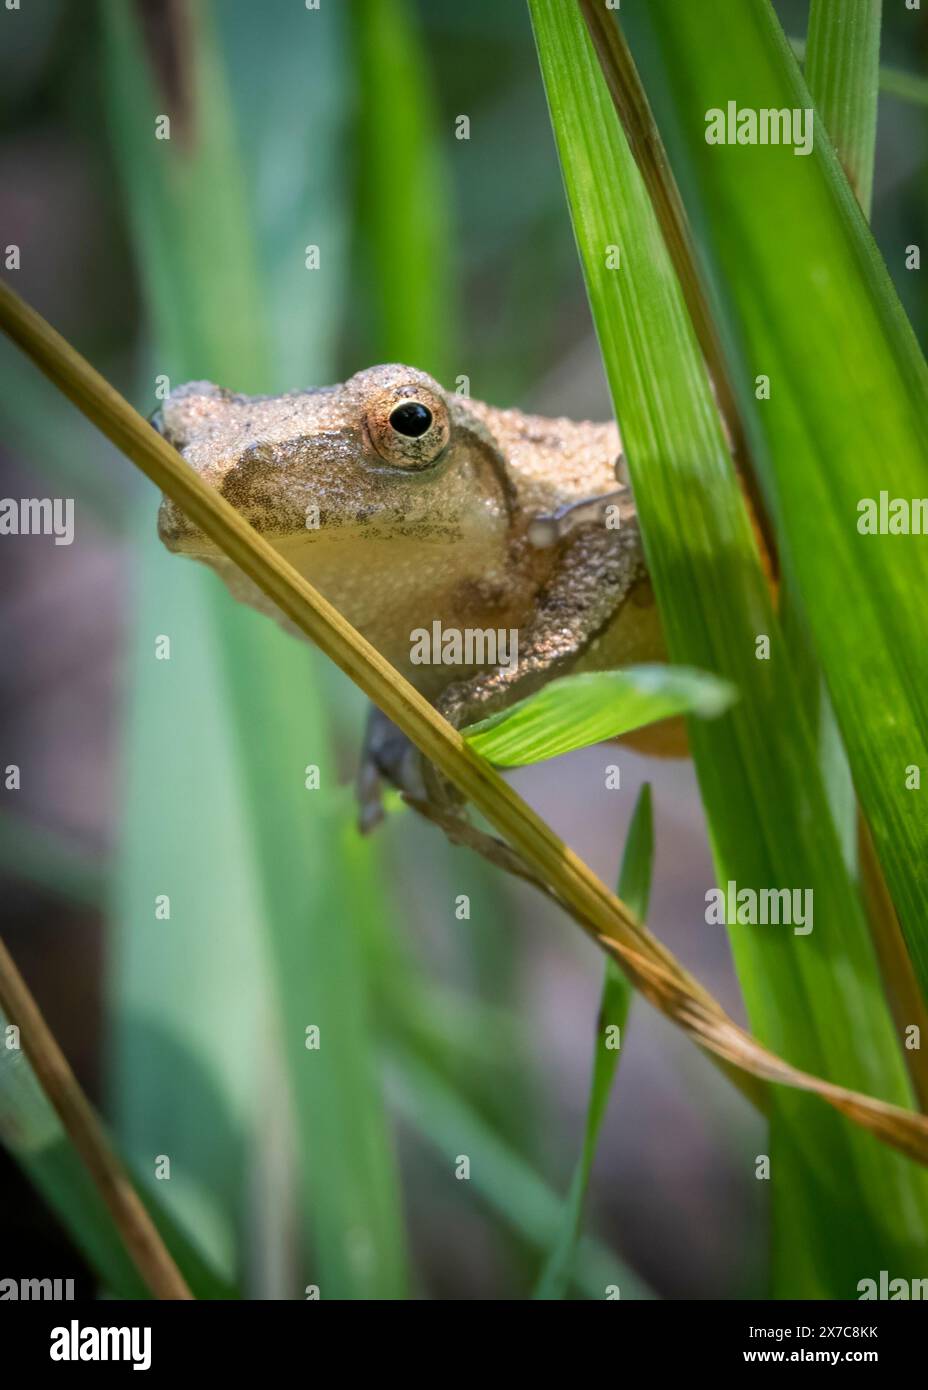 A small spring peeper, a tiny frog no larger than a thumb, clings to a blade of grass with delicate precision. Stock Photo